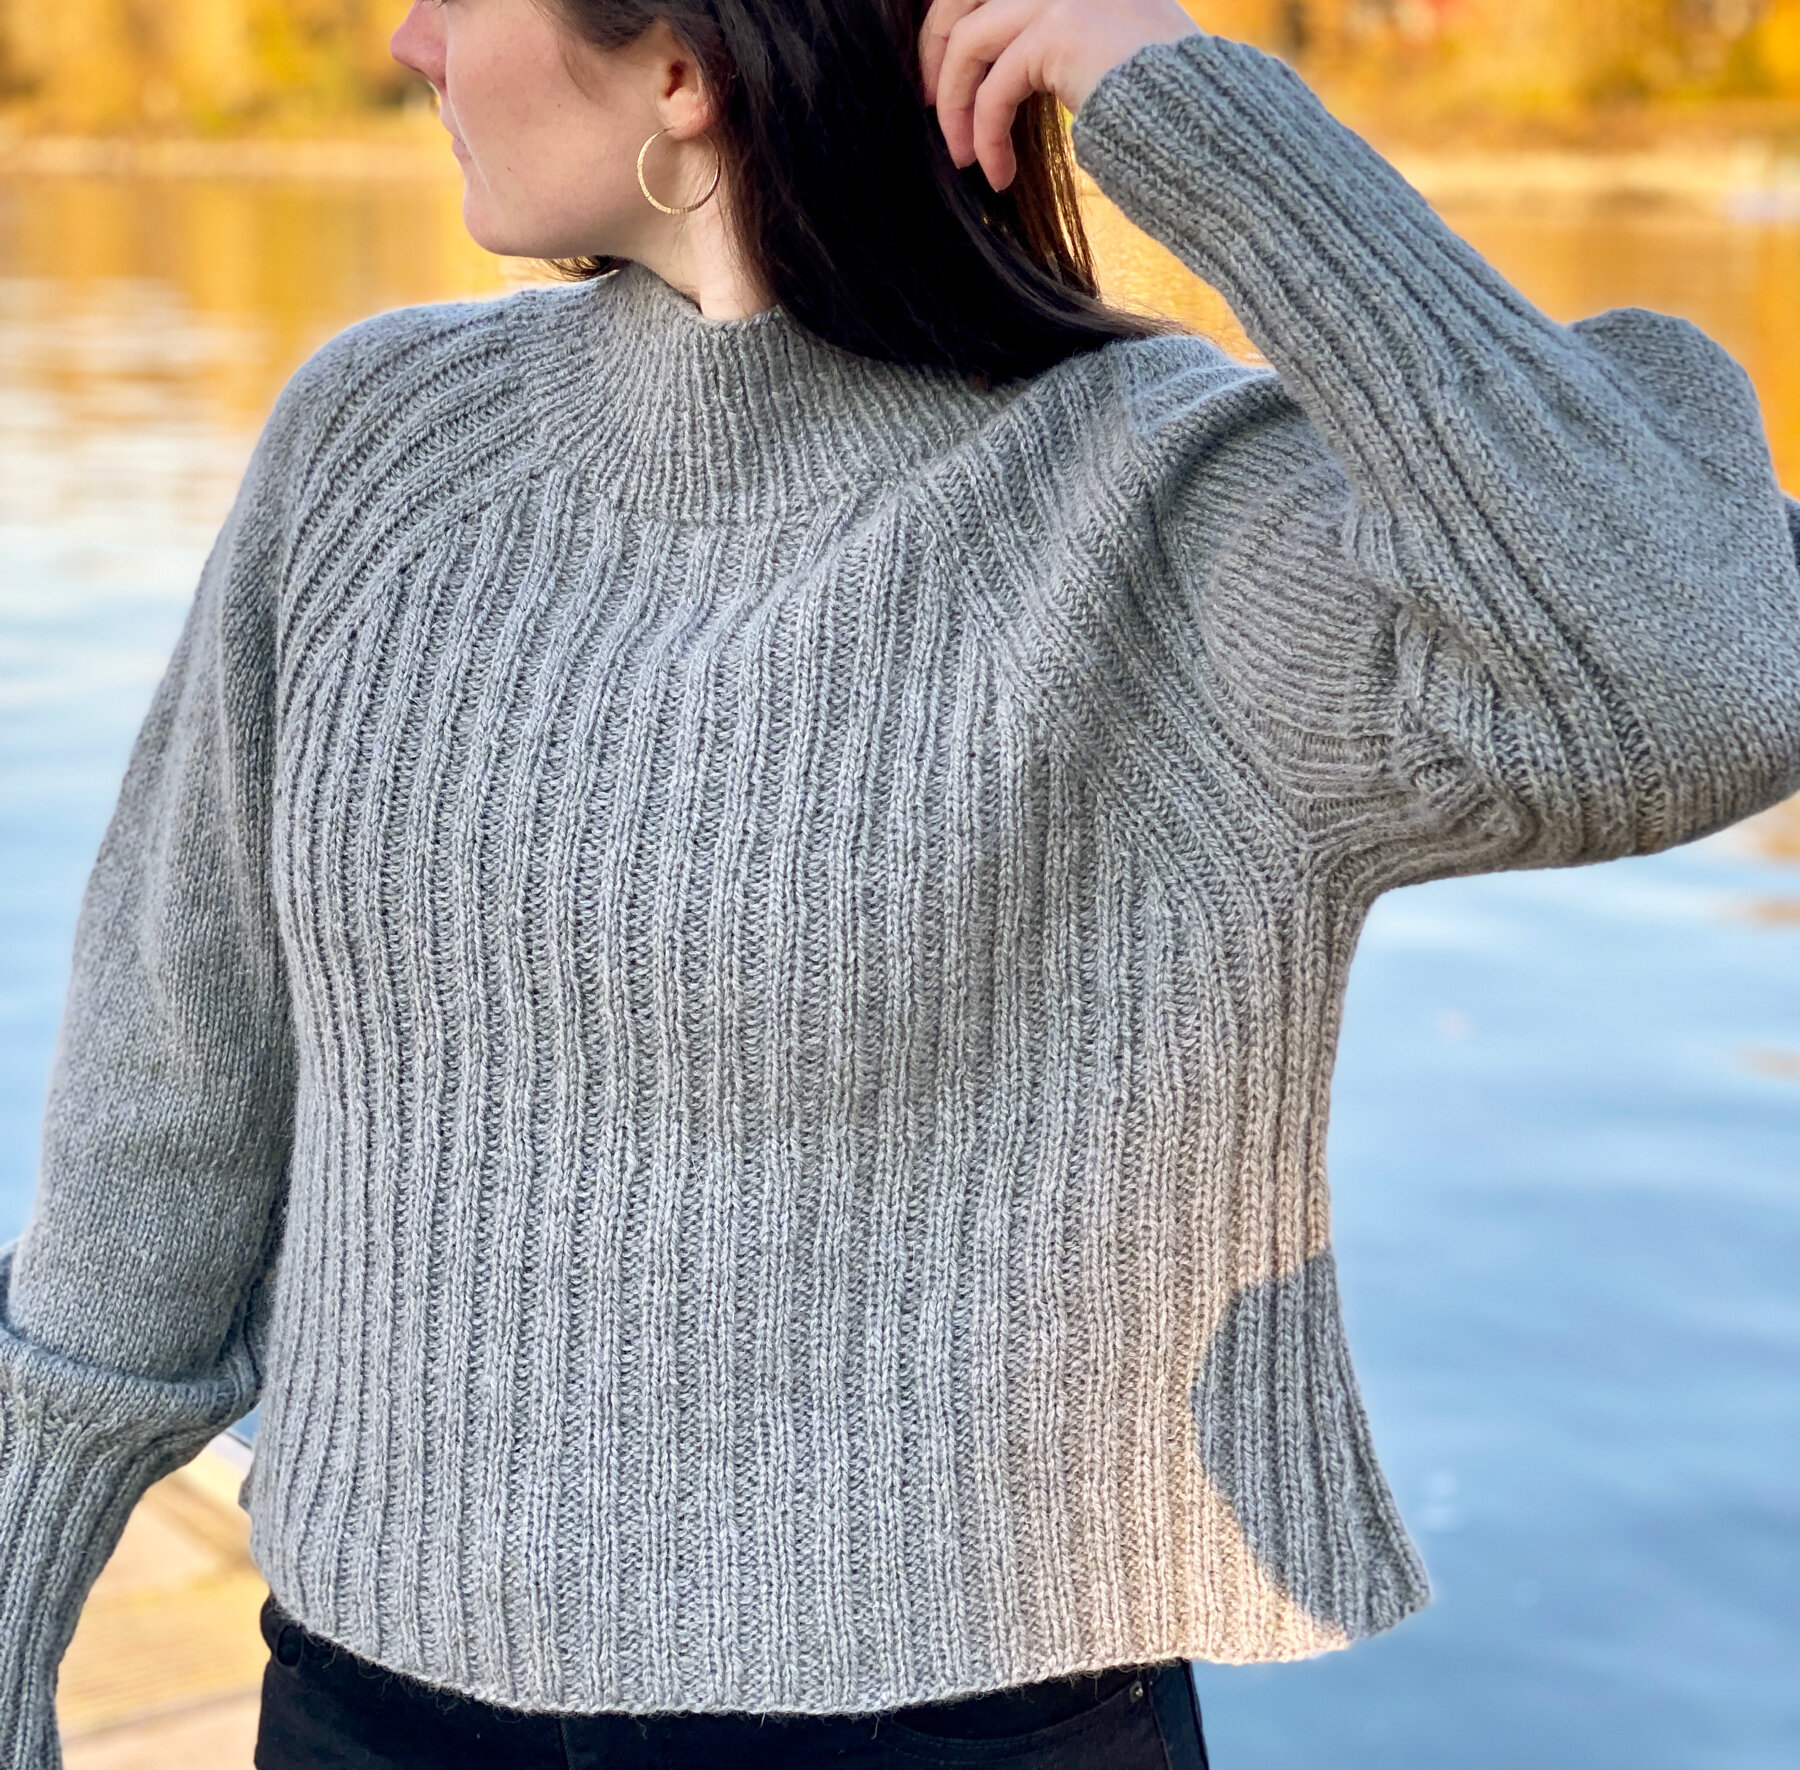 Santiam Canyon Pullover Sweater Knitting Pattern — Knit for the Soul by Kay  Hopkins